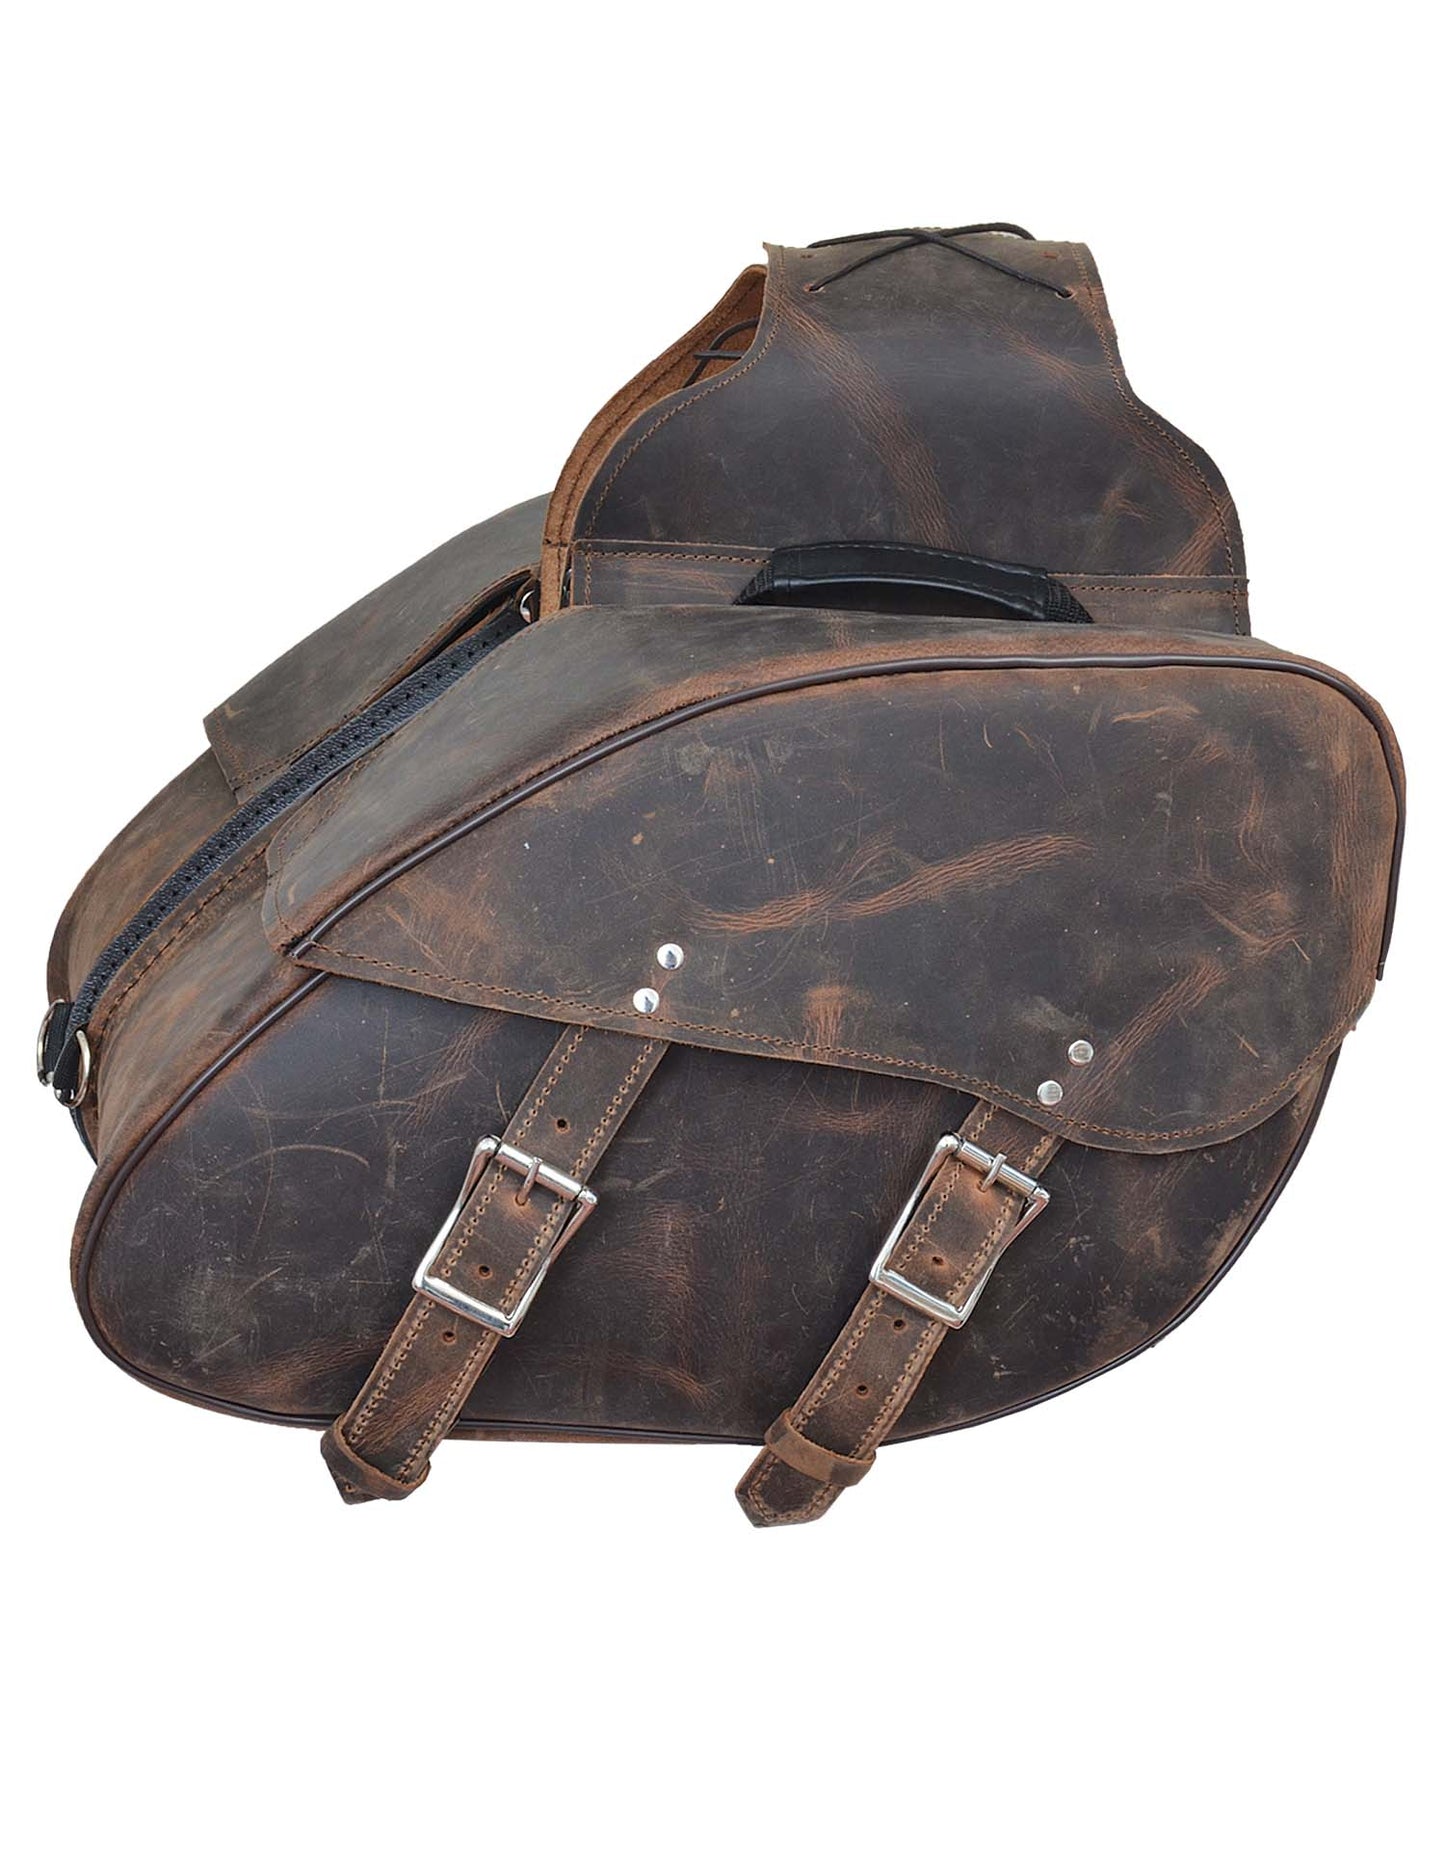 2 PIECE MOTORCYCLE REAL LEATHER DISTRESSED LOOK SADDLEBAG